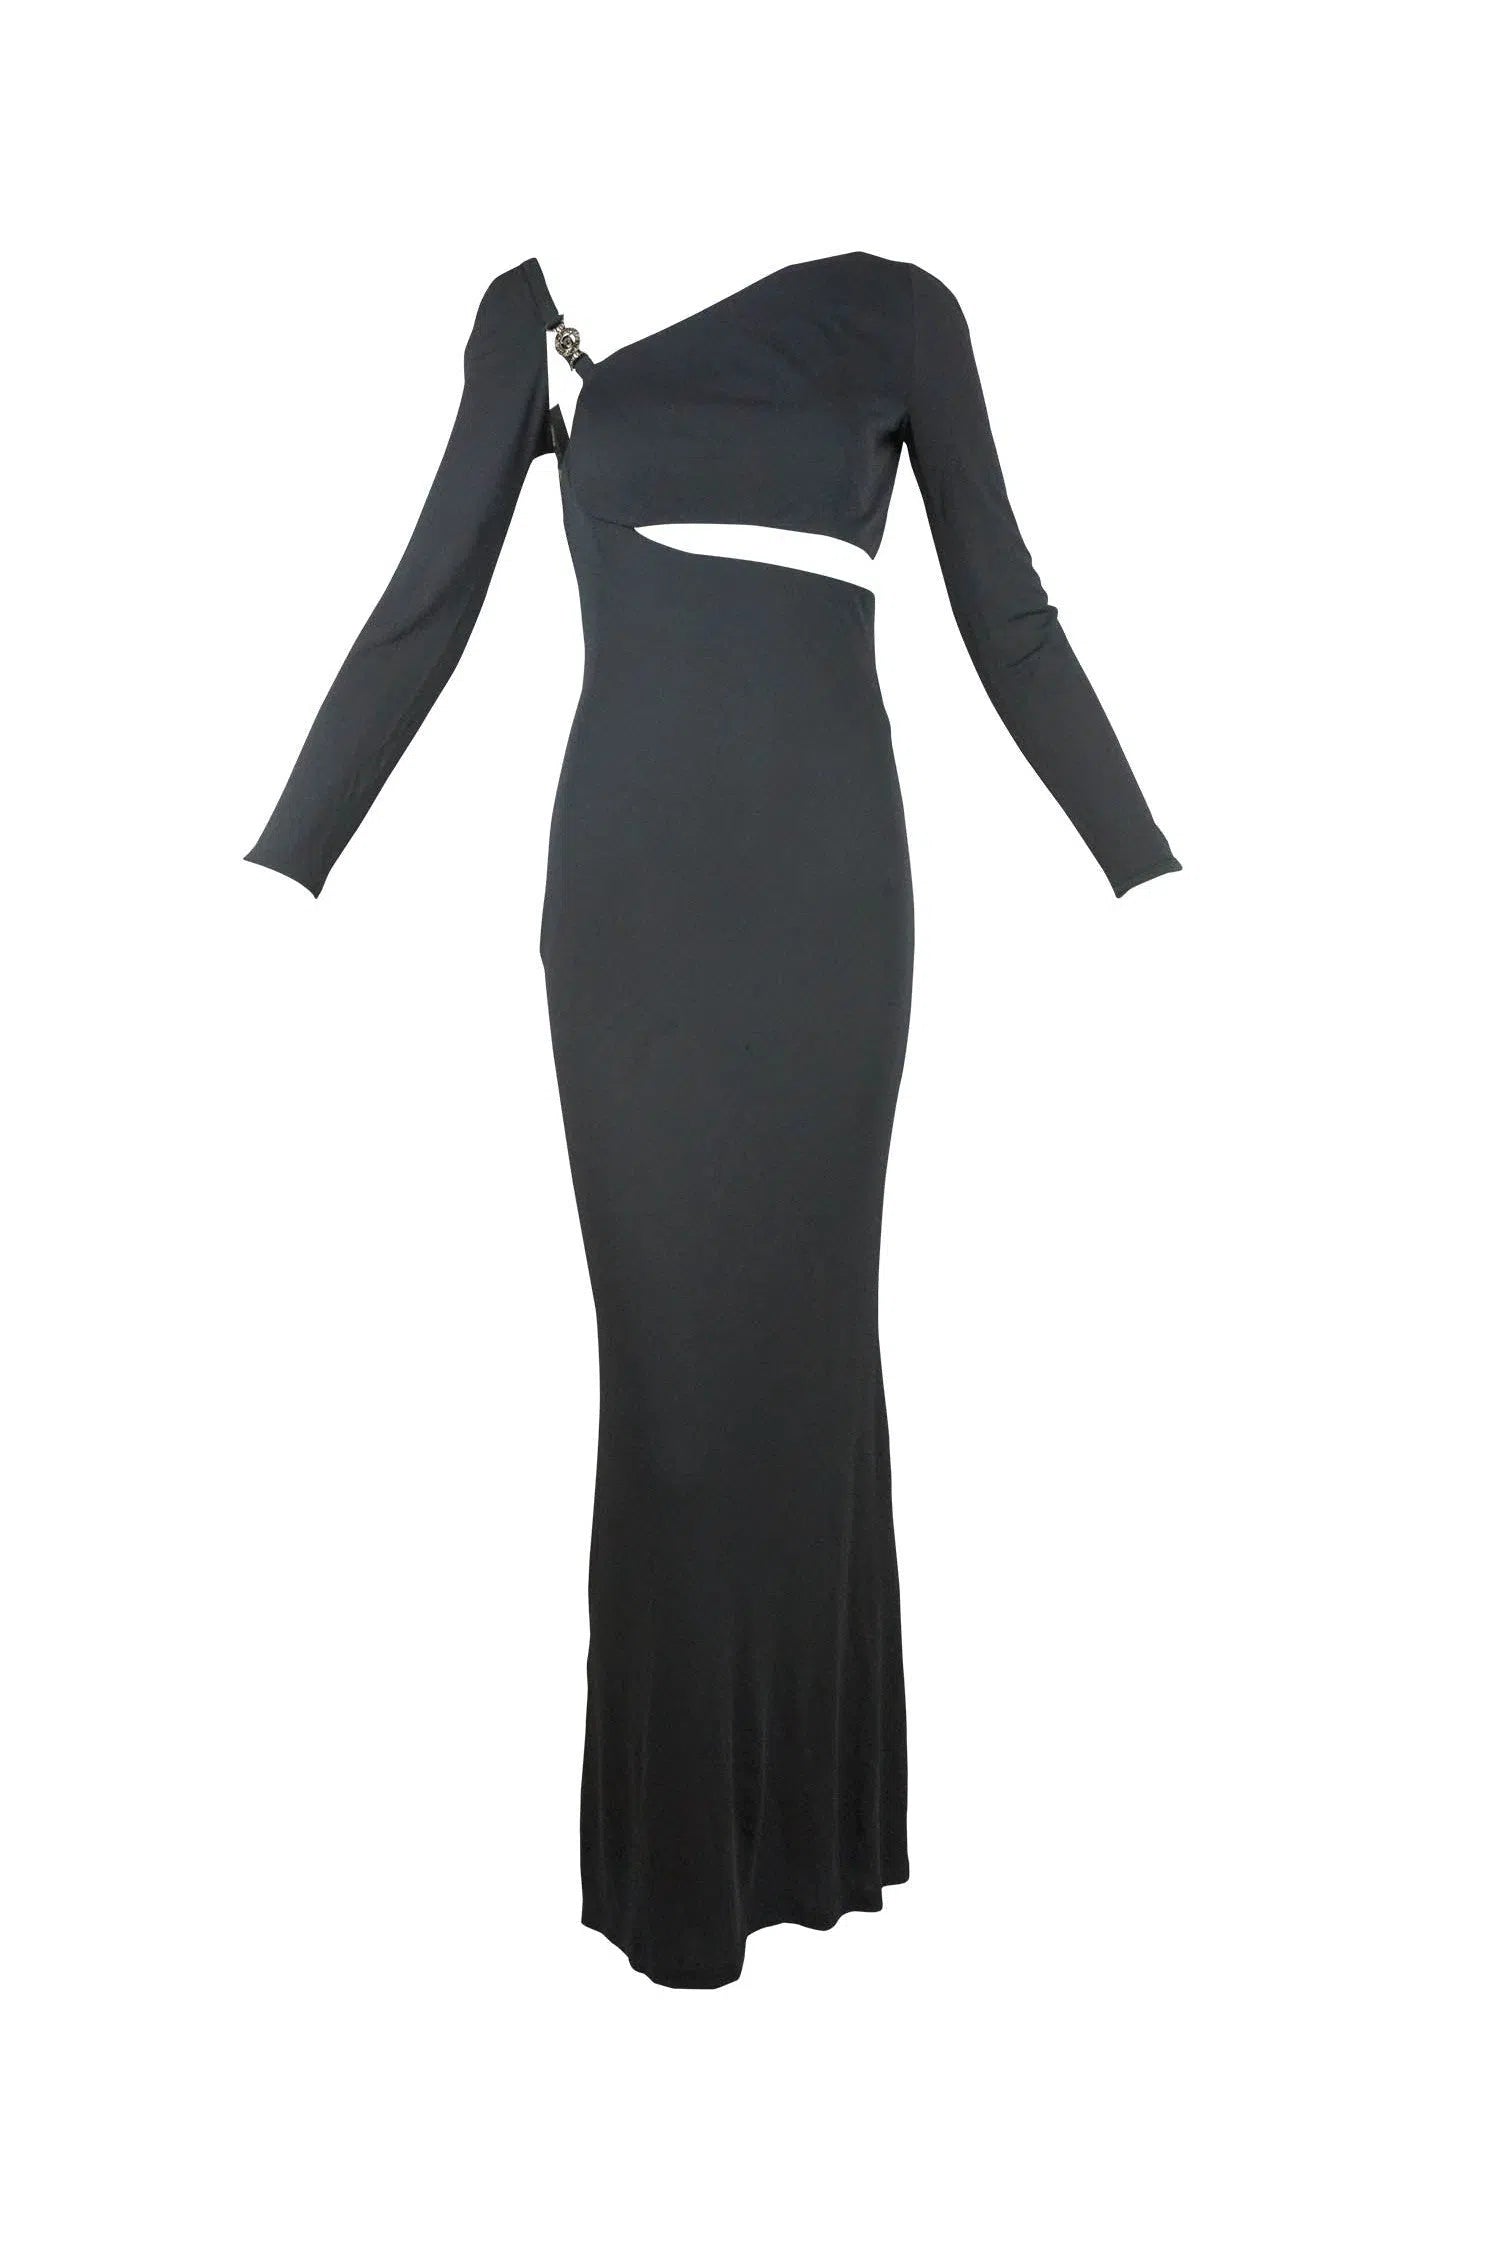 Gianni Versace Vintage Jersey Cut Out Gown 1990's